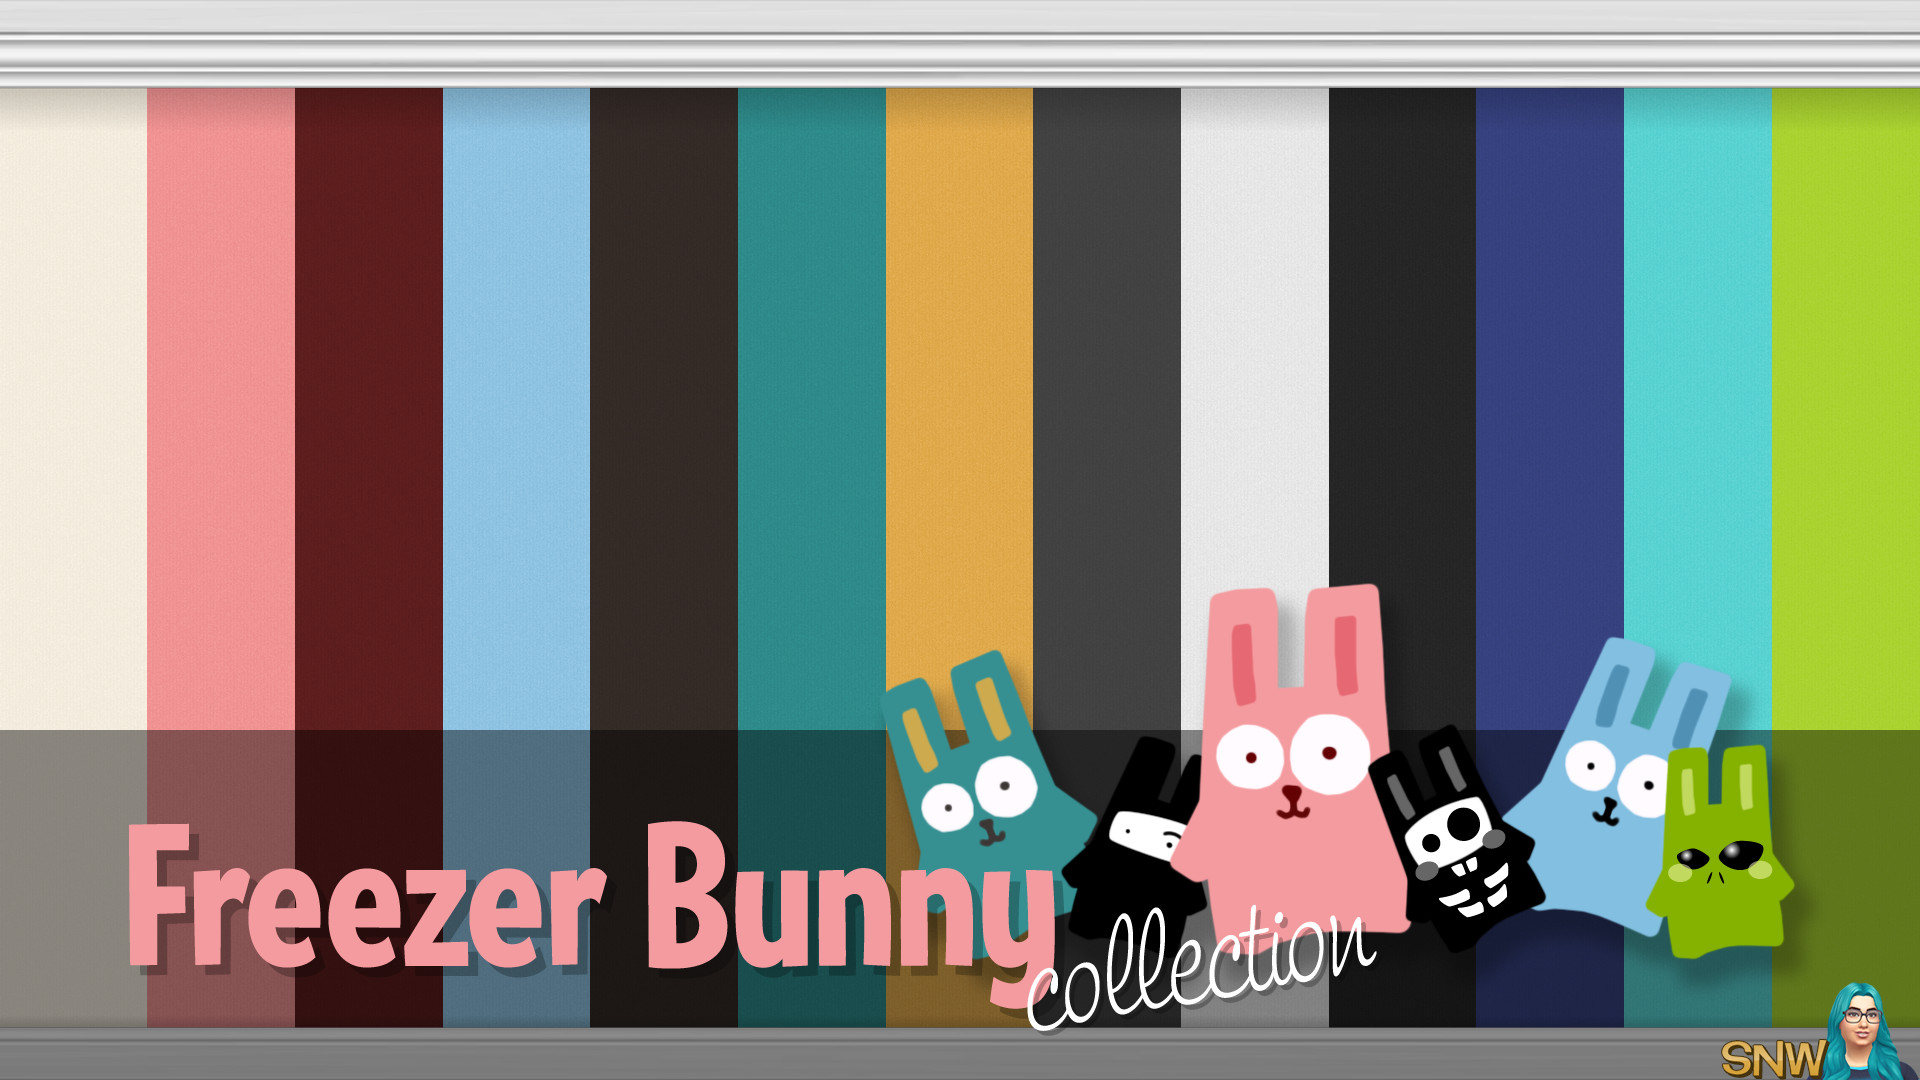 1920x1080 Freezer Bunny Collection: Plain Wallpapers